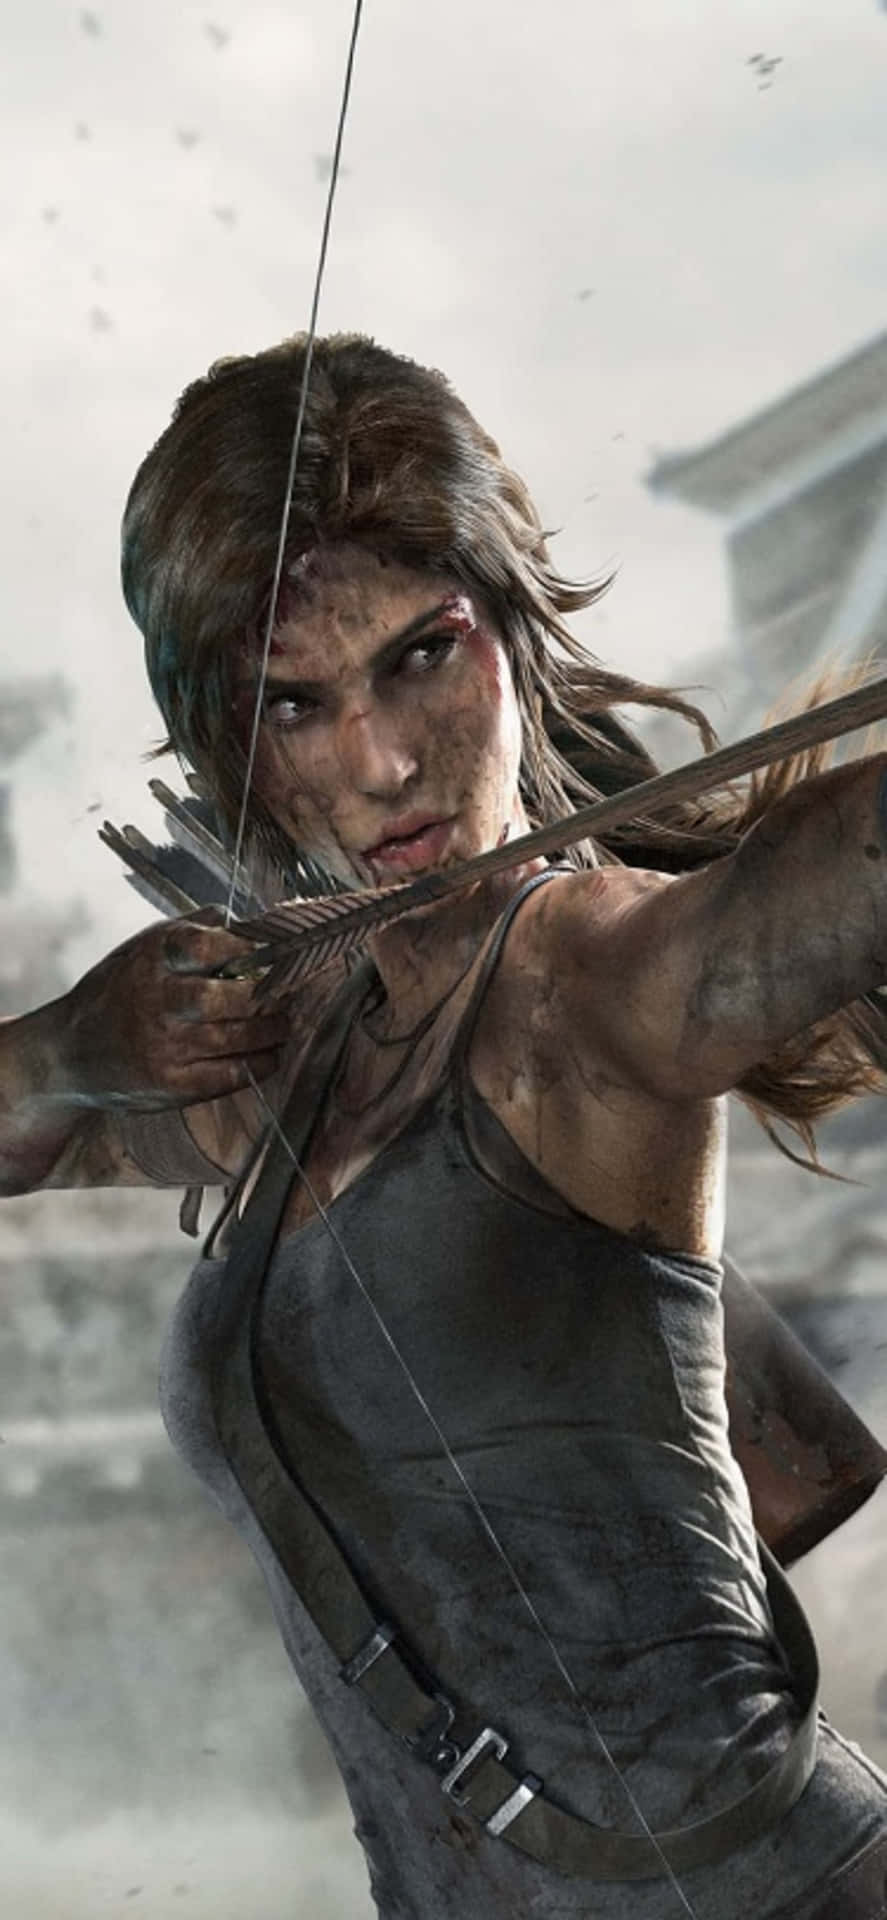 the tomb raider is aiming her bow at a city